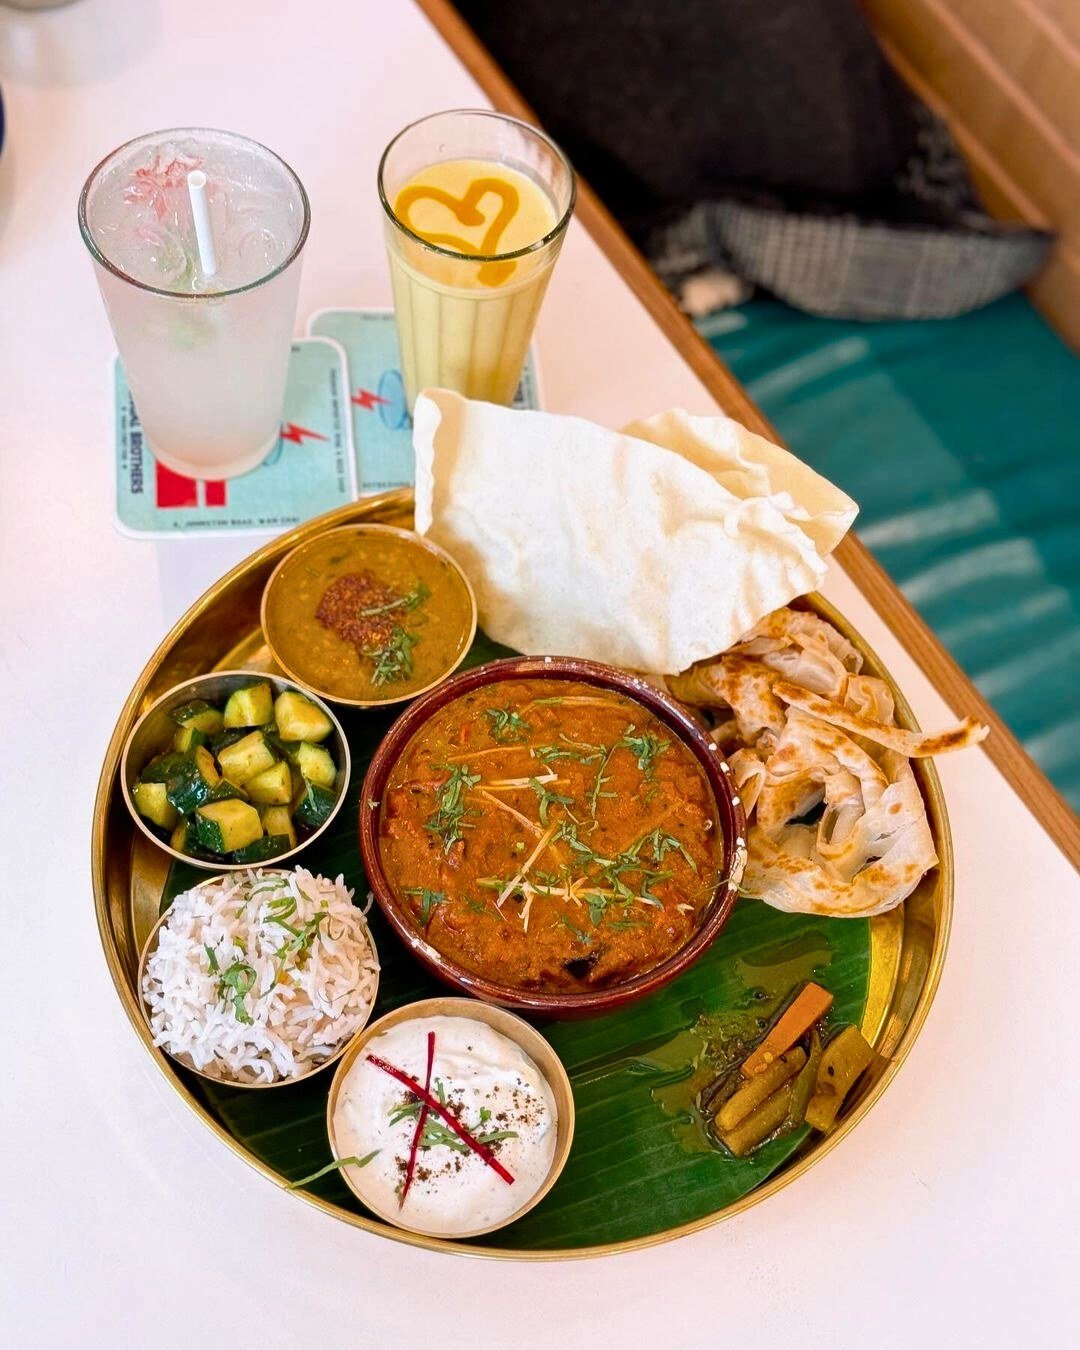 Final call for our April Thali Deluxe - Pickled Aubergine Curry! 🙊🍆

Come savour this delicious savoury, tangy curry before we refresh the menu next month. Can you guess what ingredient we'll be featuring in May? Drop us a comment below! 😜

Thanks